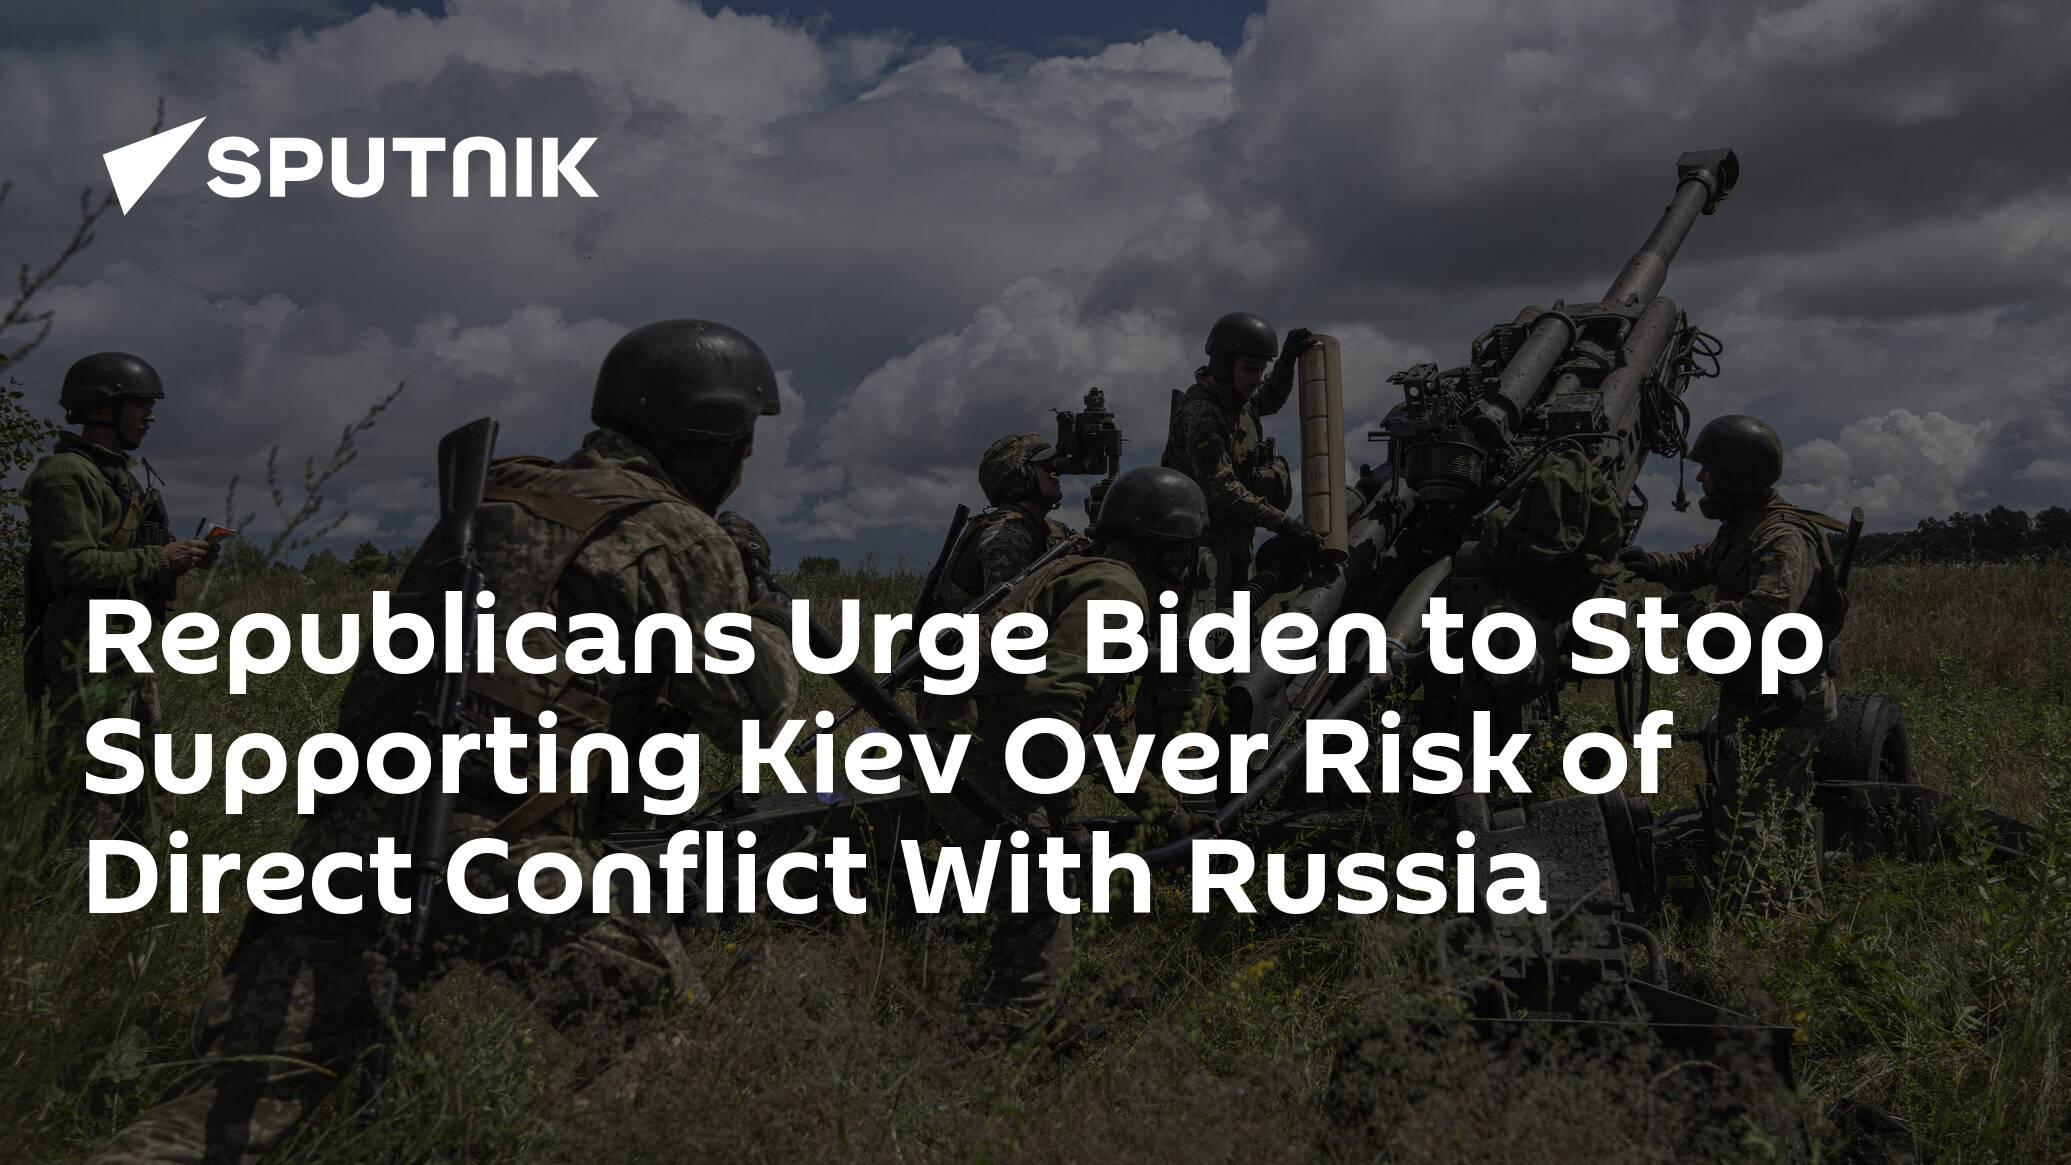 Republicans Urge Biden to Stop Supporting Kiev Over Risk of Direct Conflict With Russia